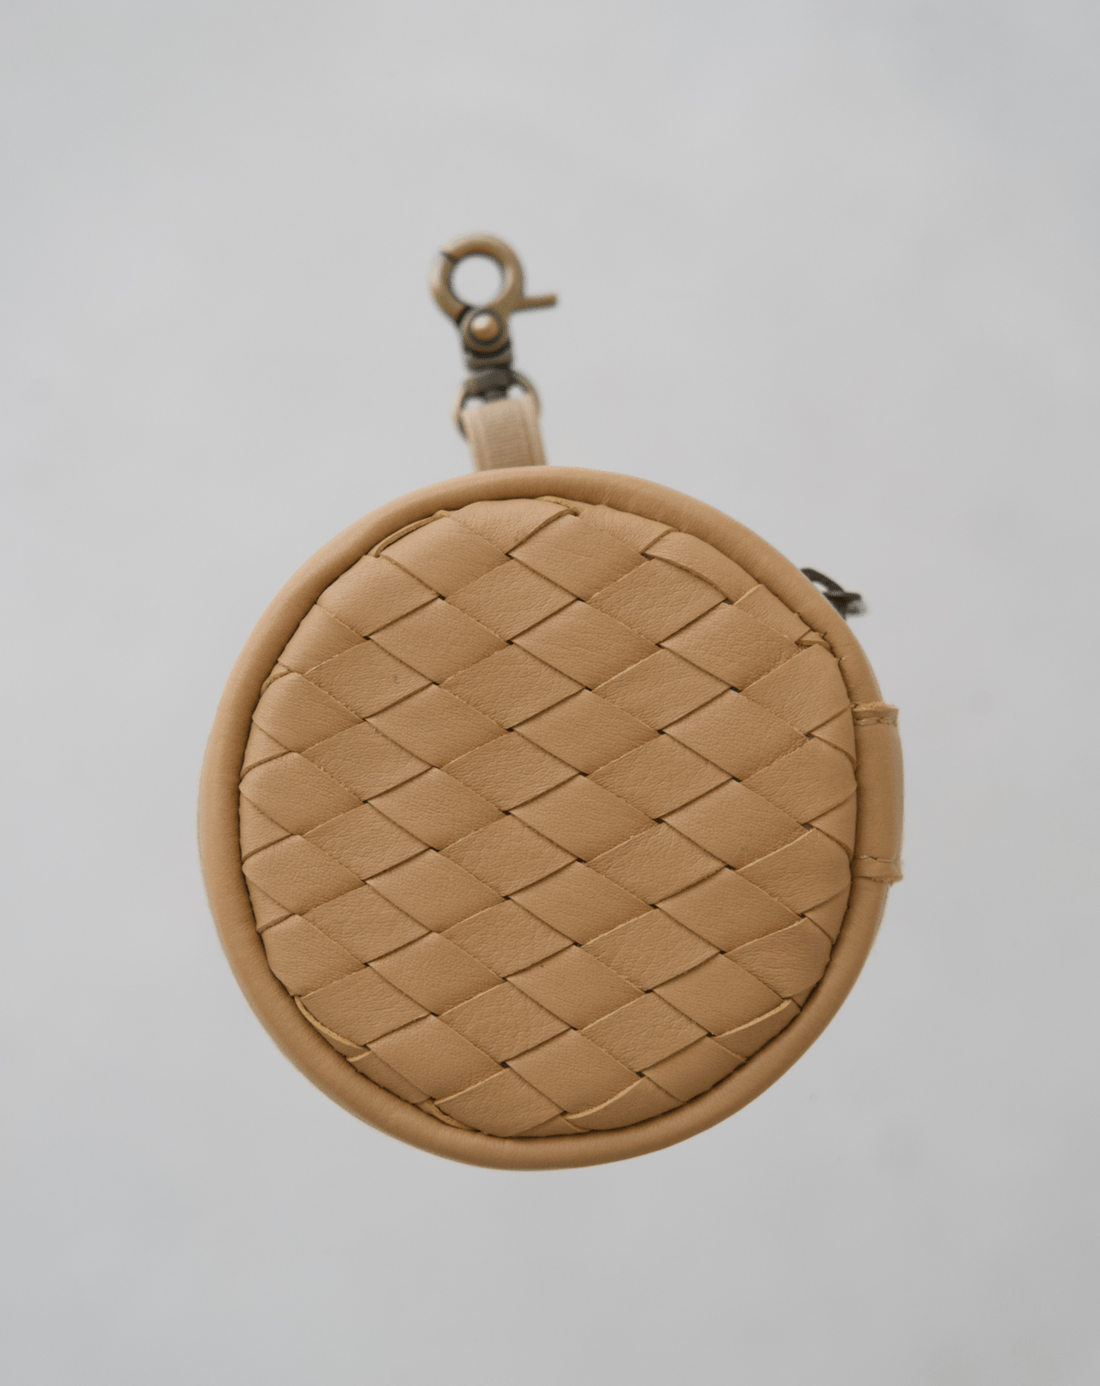 Mandrn Rover Woven Circle Pouch - Sand Circle Pouch Add-On